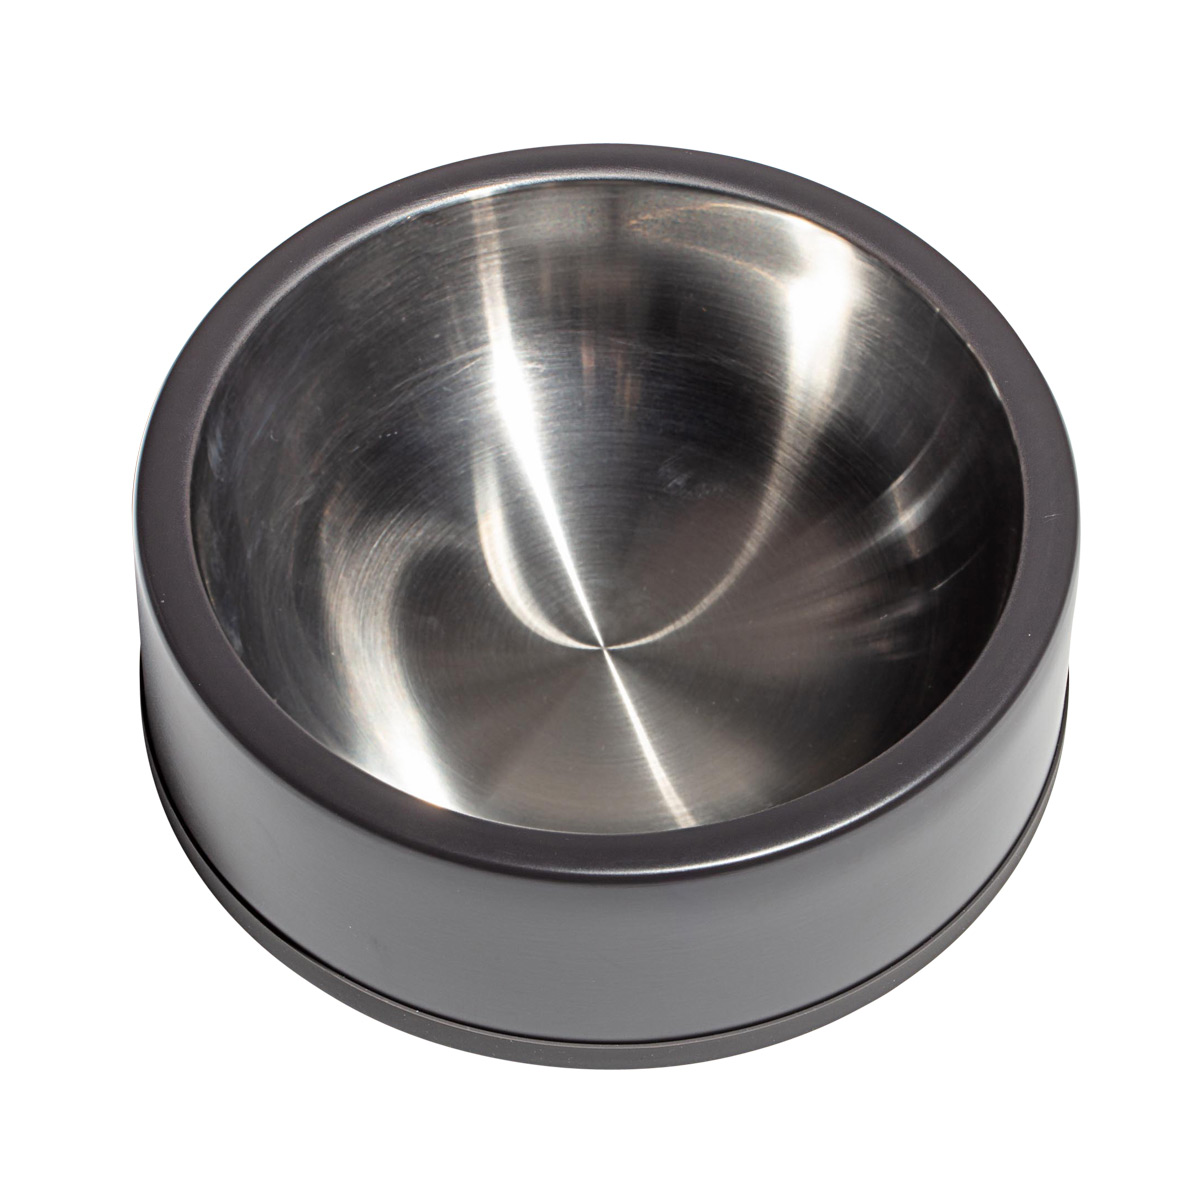 https://www.containerstore.com/catalogimages/414876/10085156-Wild-One-Pet-Food-Bowl-VEN3.jpg